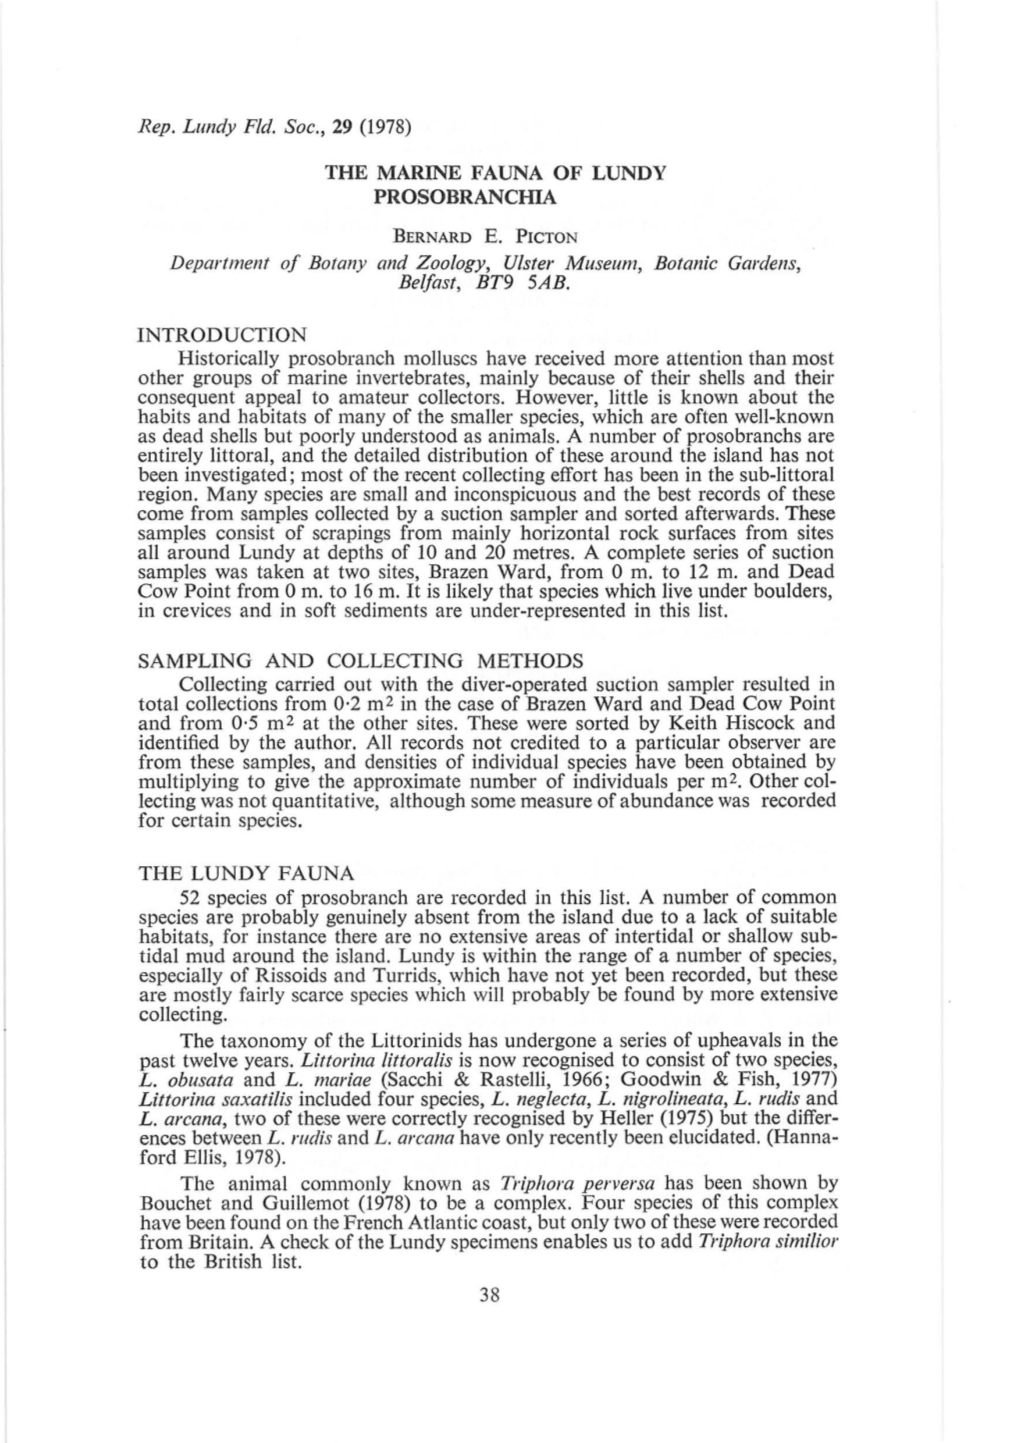 Rep. Lundy Fld. Soc., 29 (1978) the MARINE FAUNA of LUNDY